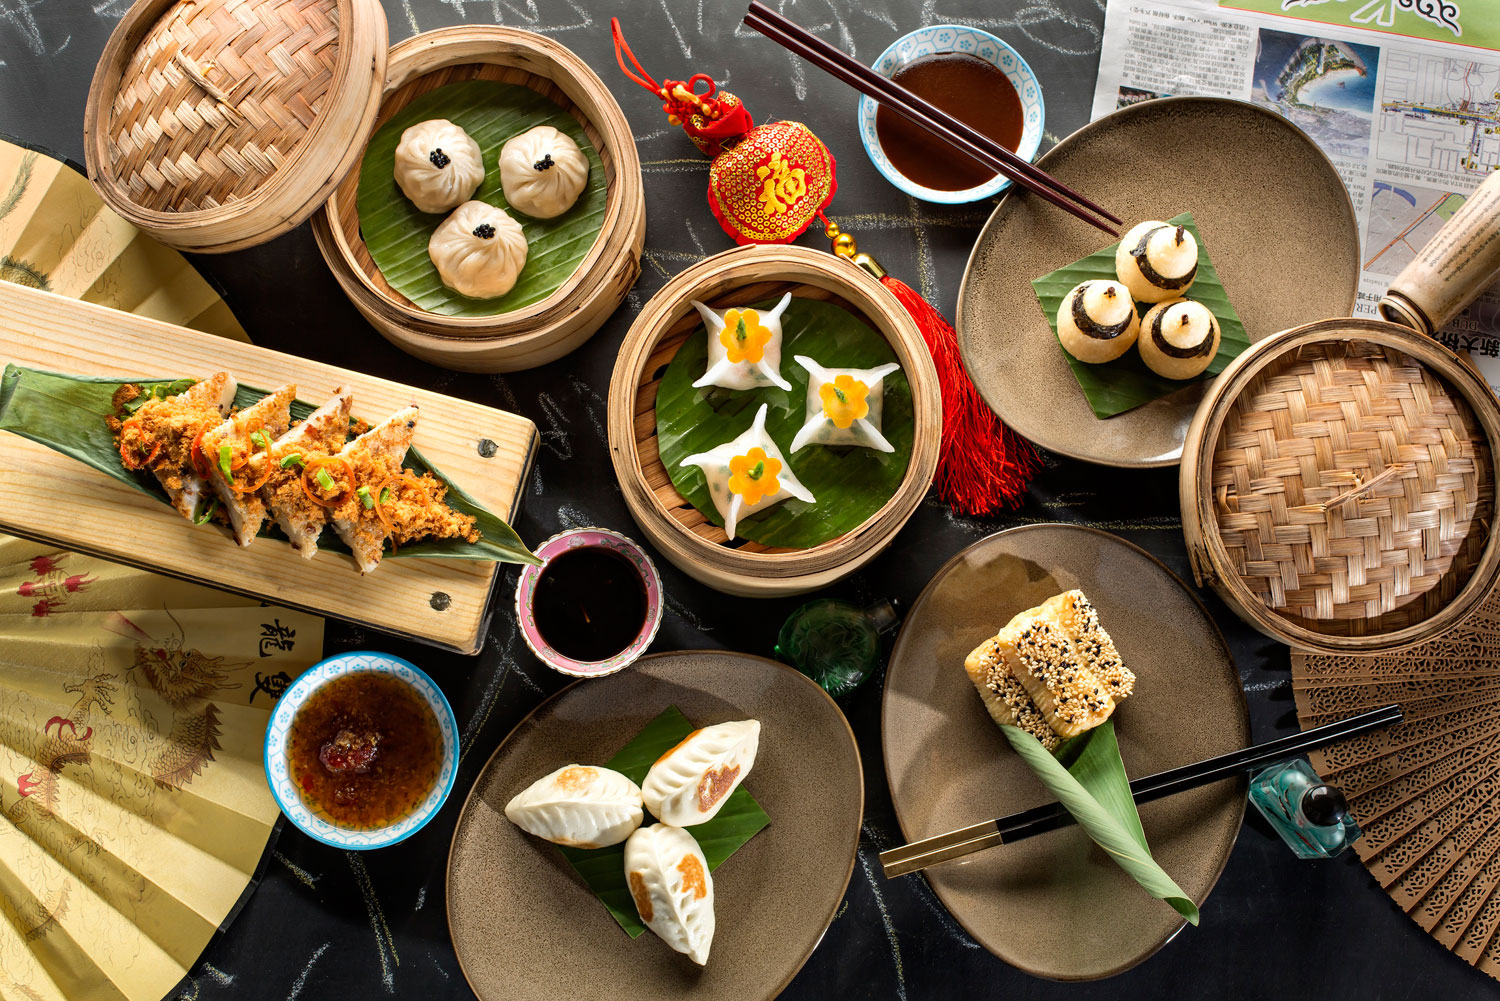 Zheng He offers Dubai’s first Beijing Duck brunch, with only three items on the menu that do not feature duck.